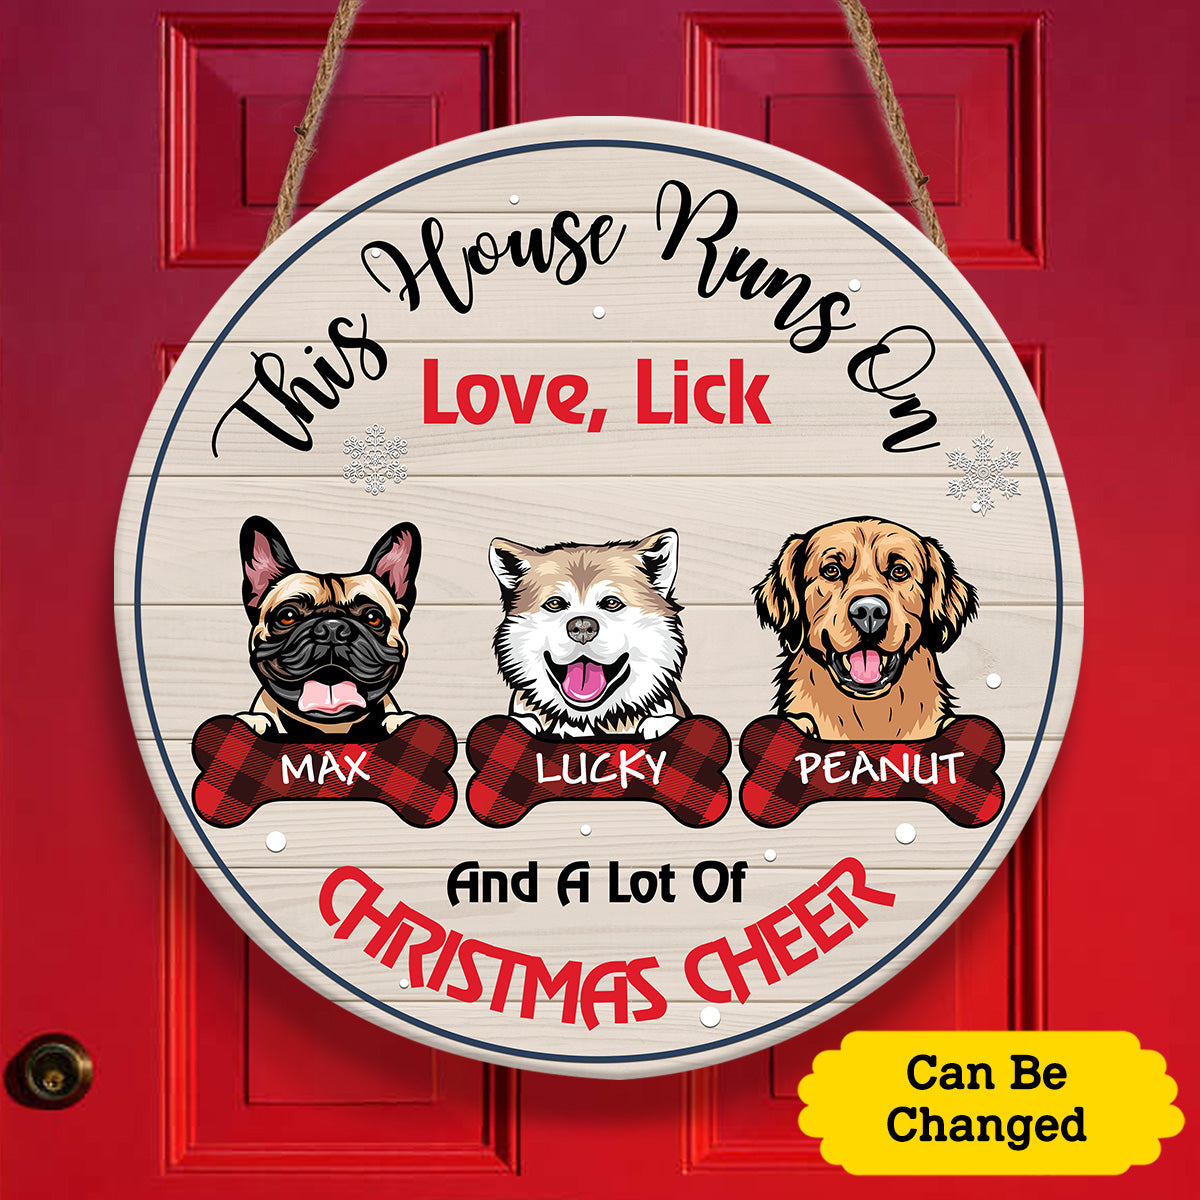 This House Runs On Love, Lick And A Lot Of Christmas Cheer Dog Door Sign Personalizedwitch Personalized Round Wood Sign Outdoor Decor